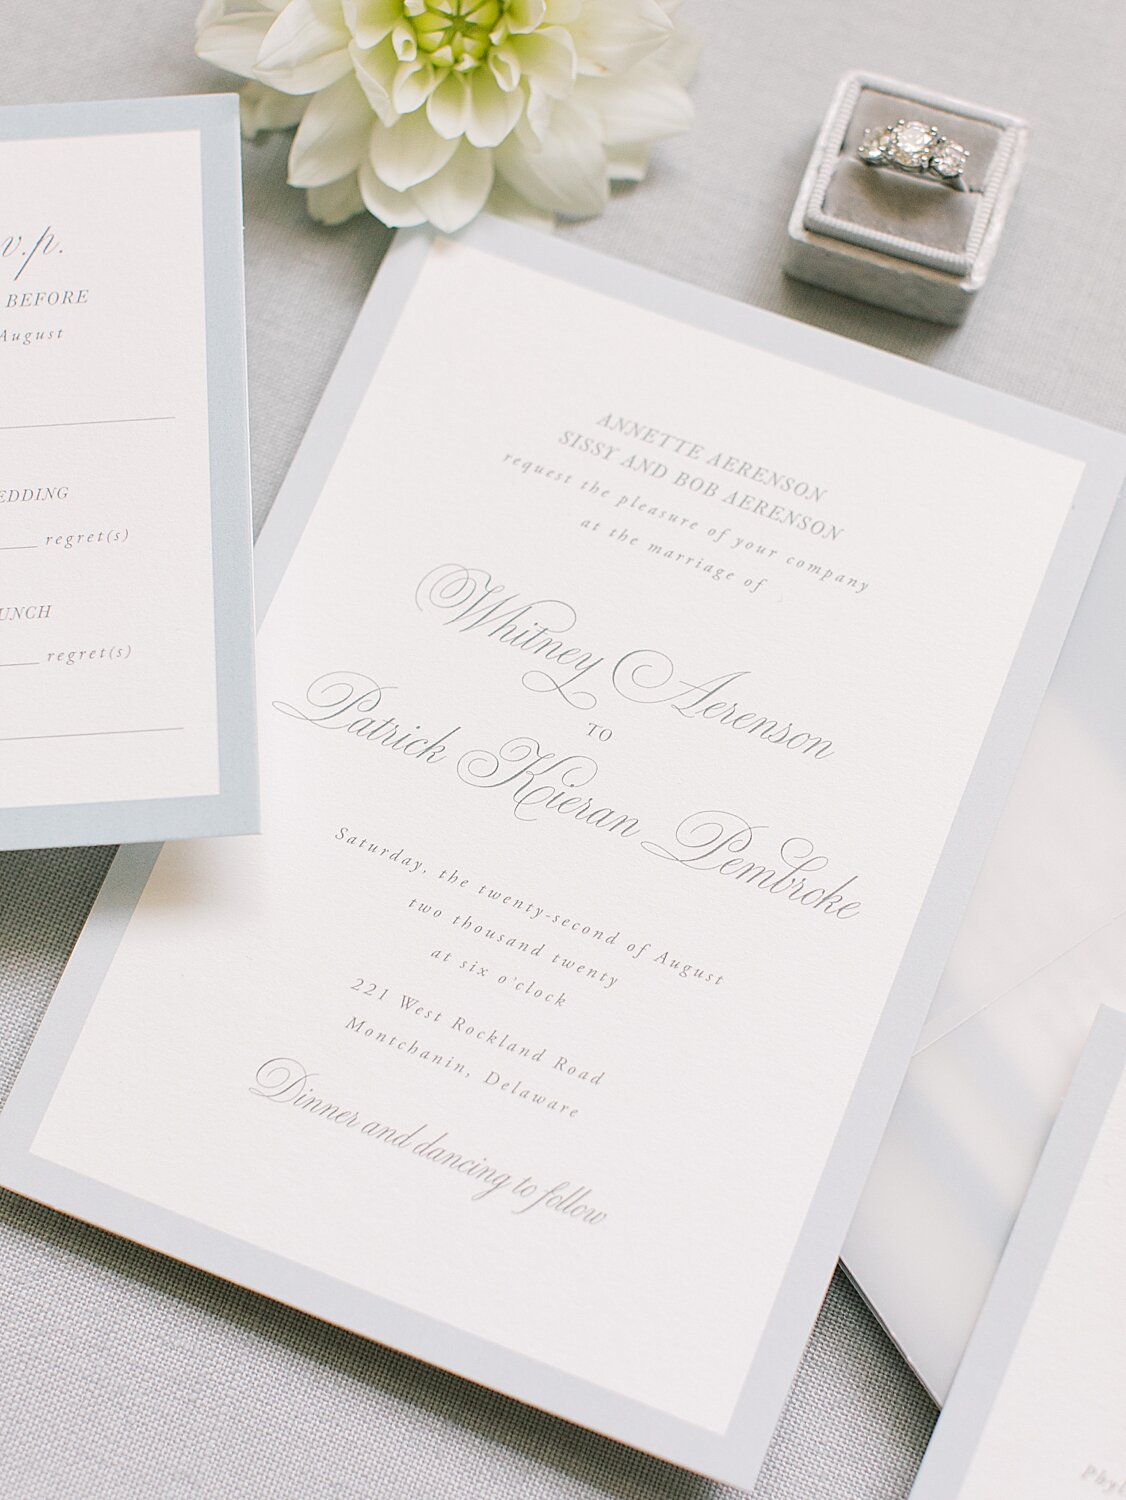 invitation suite for microwedding at New York home | Stylish Private Home Wedding Inspiration | Asher Gardner Photography